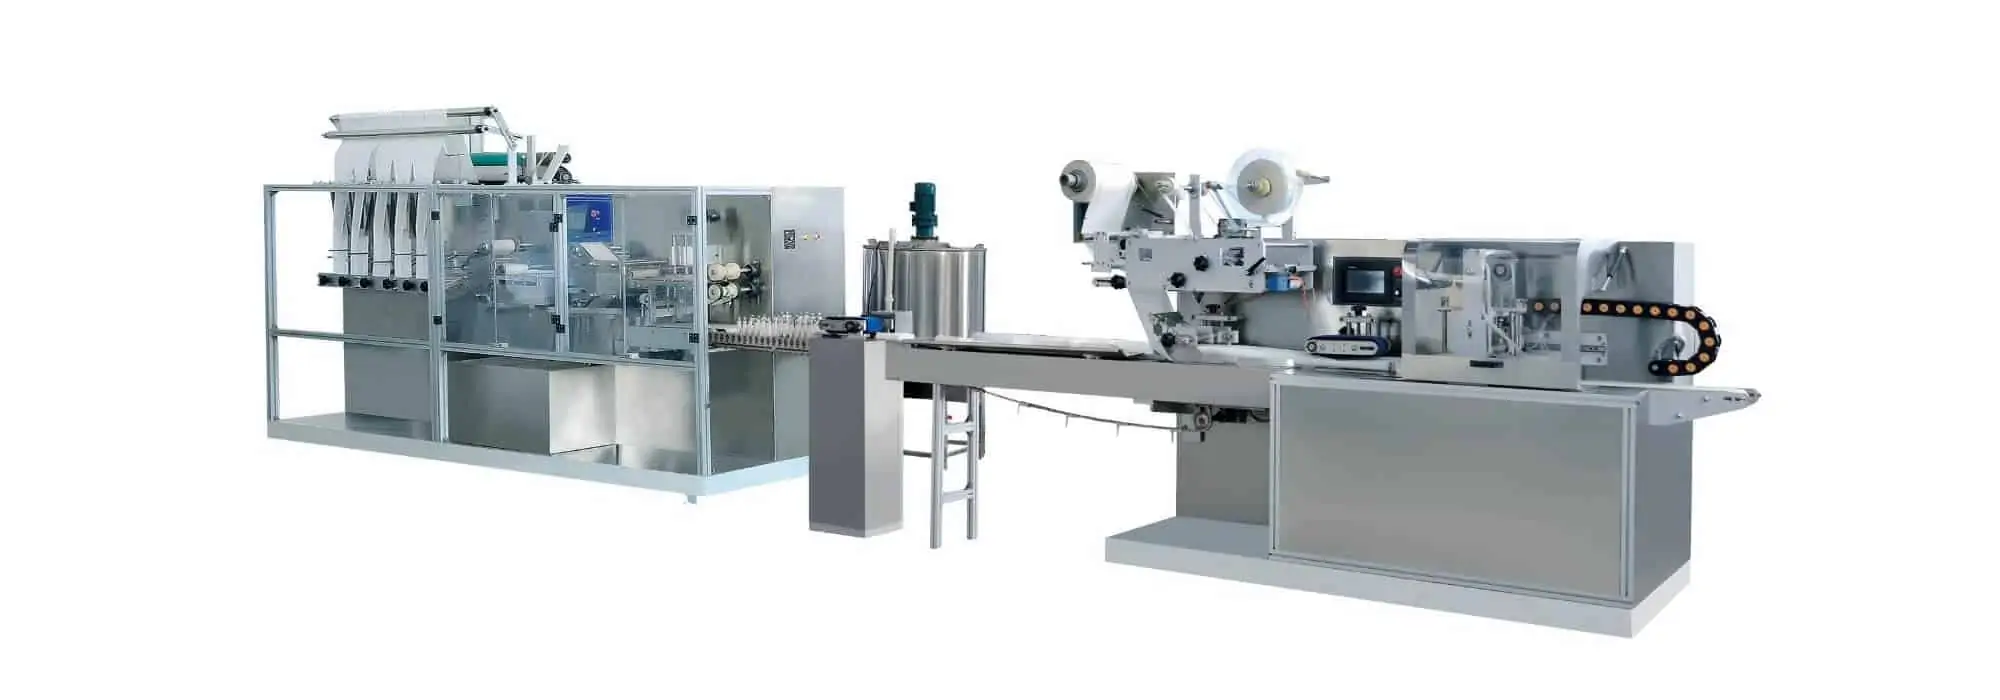 DH 6F Automatic wet wipes production line - DH-6F Automatic wet wipes production line (30-120pcs/pack)